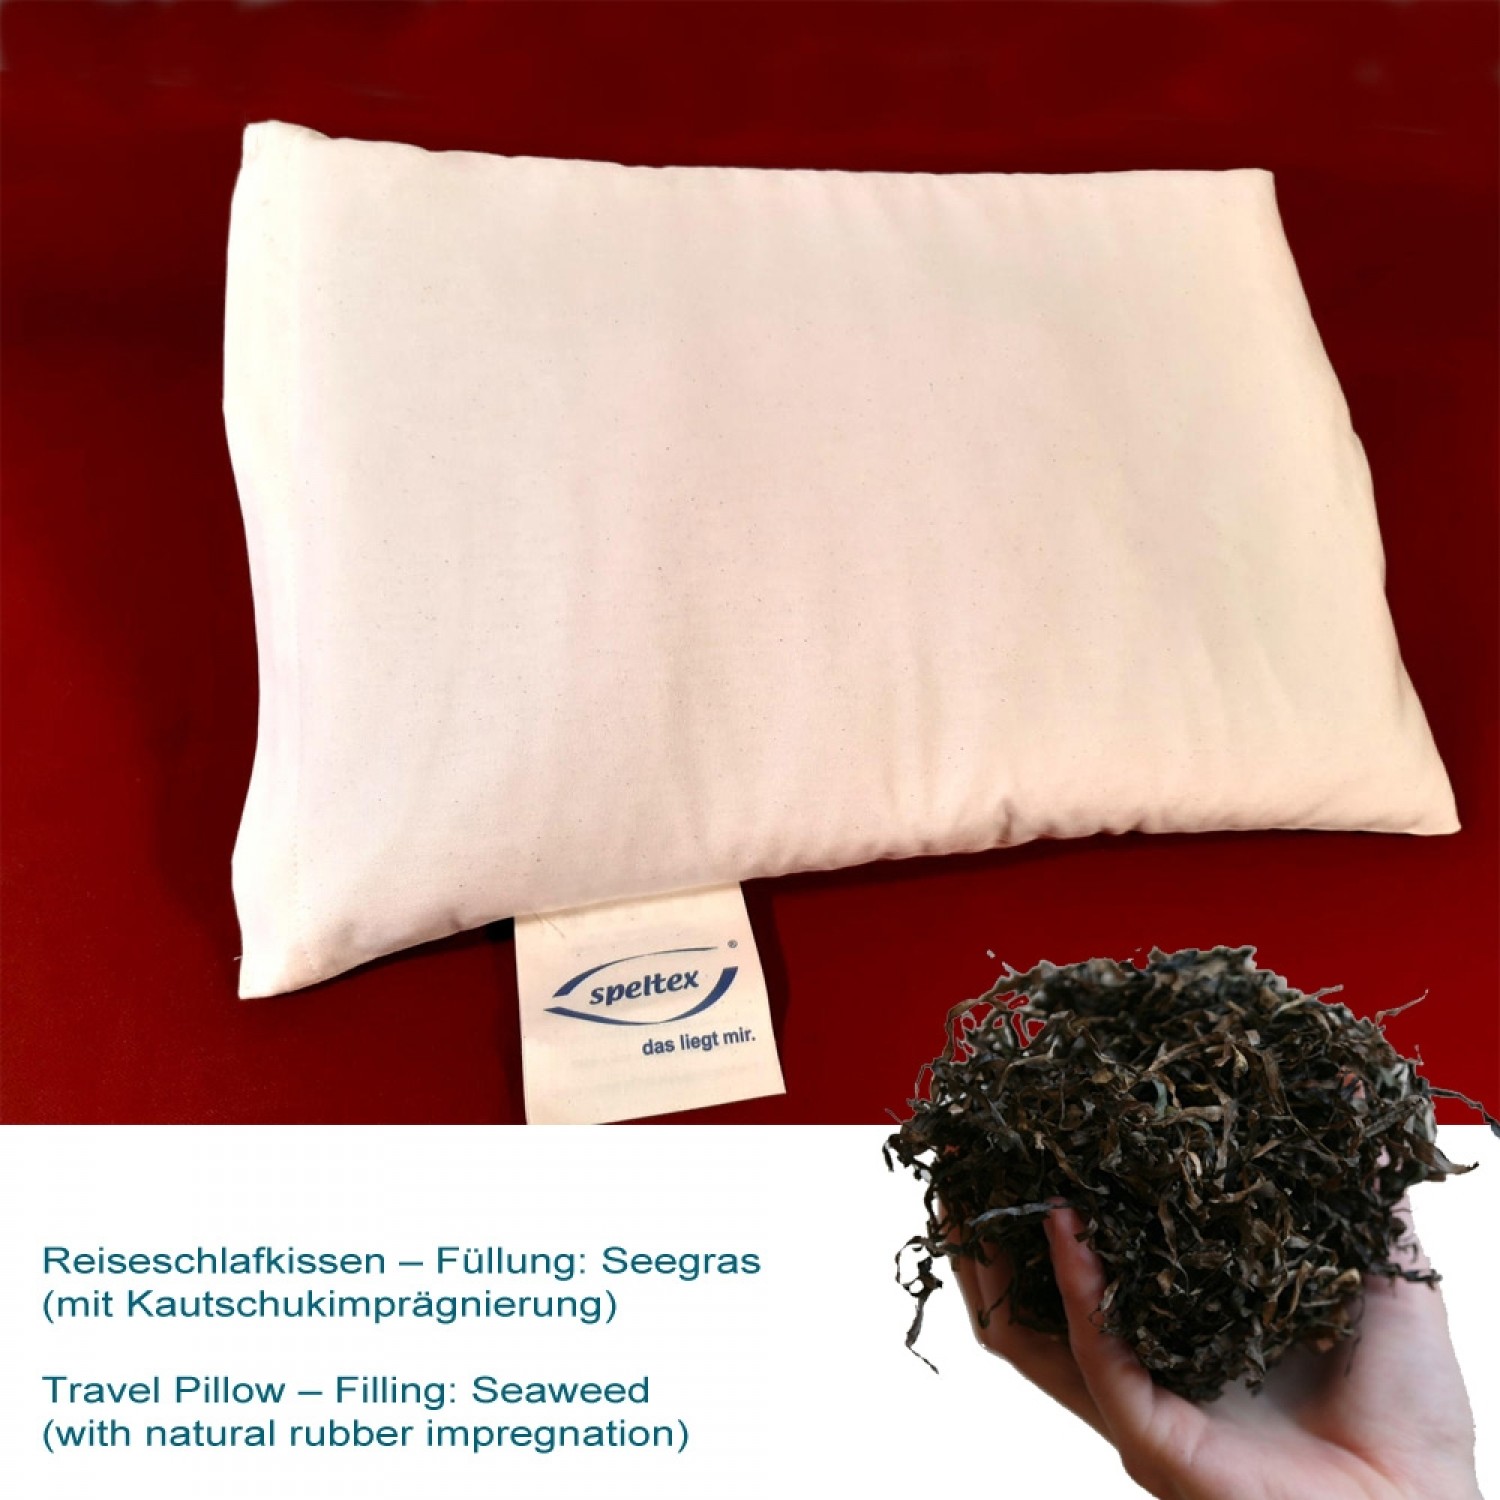 Travel Pillow with Seaweed with natural rubber | speltex